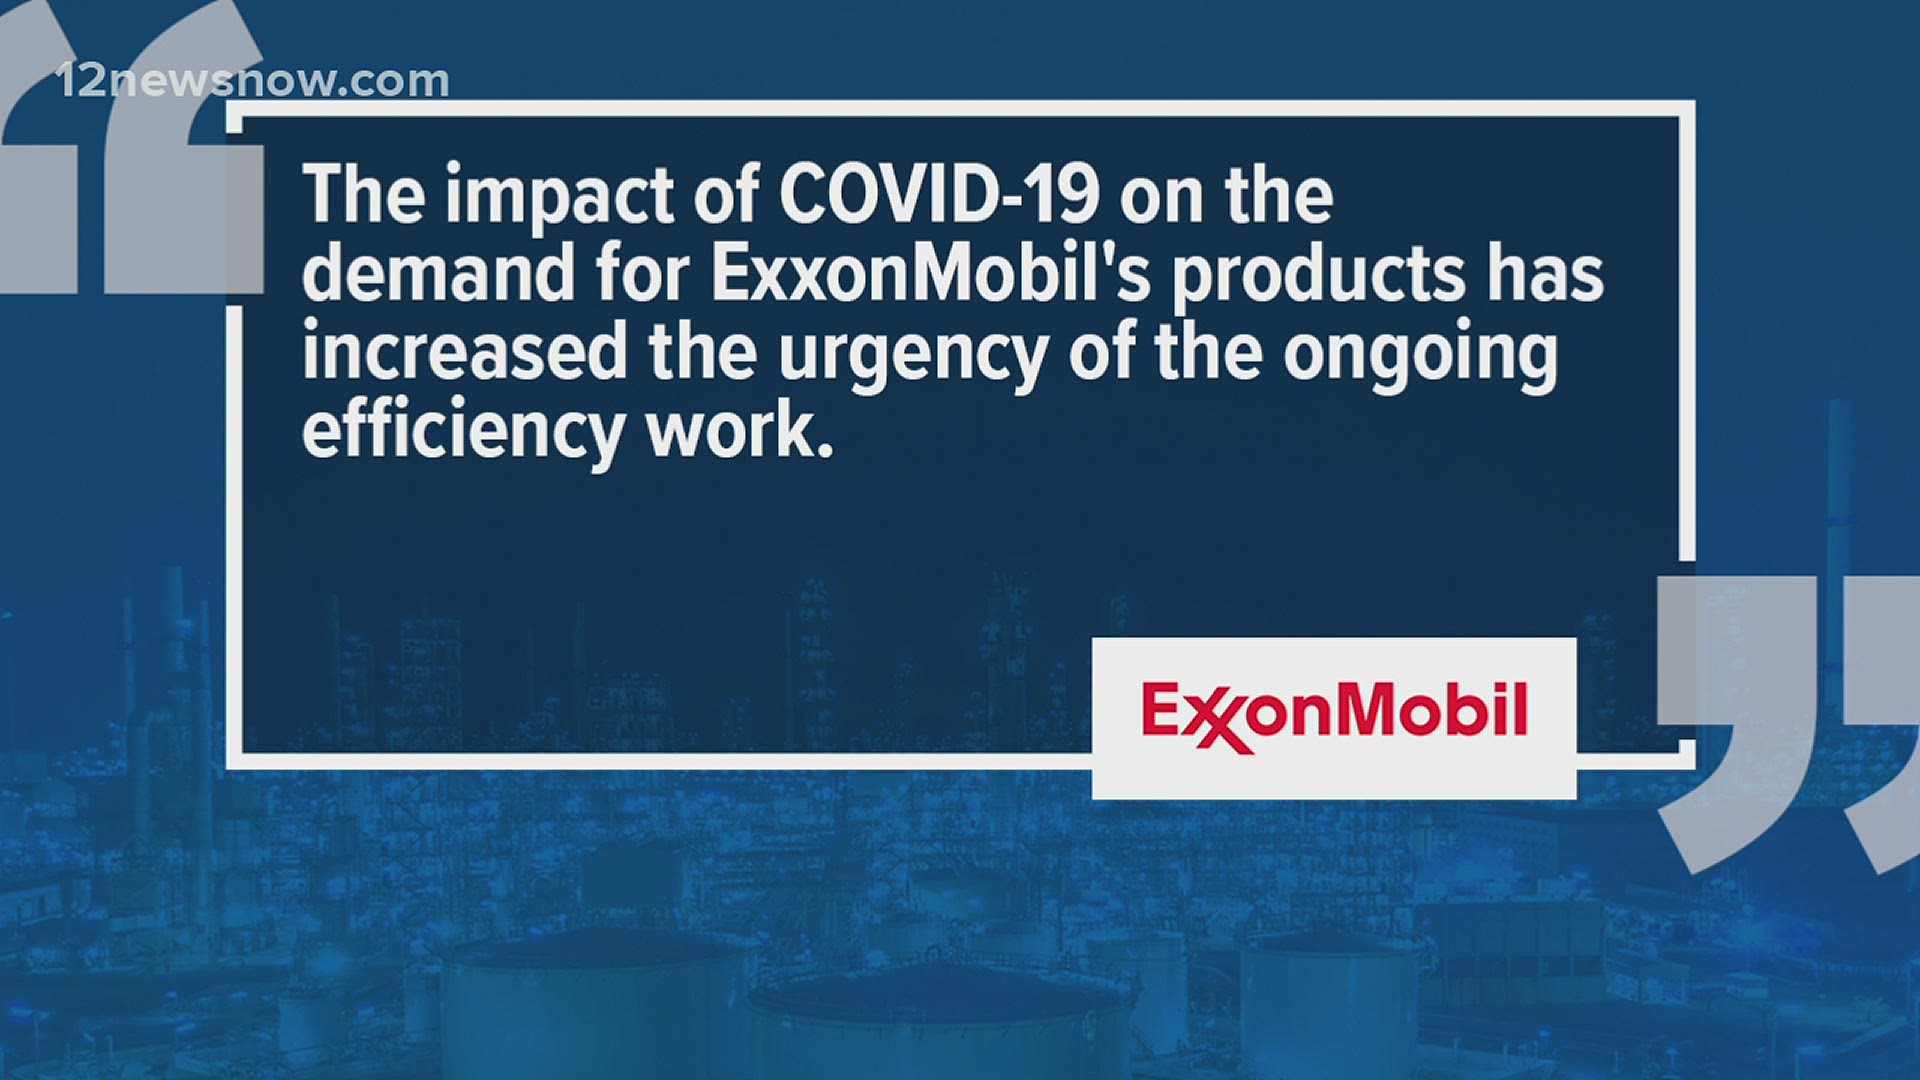 "The impact of COVID-19 on the demand for ExxonMobil's products has increased the urgency of the ongoing efficiency work."